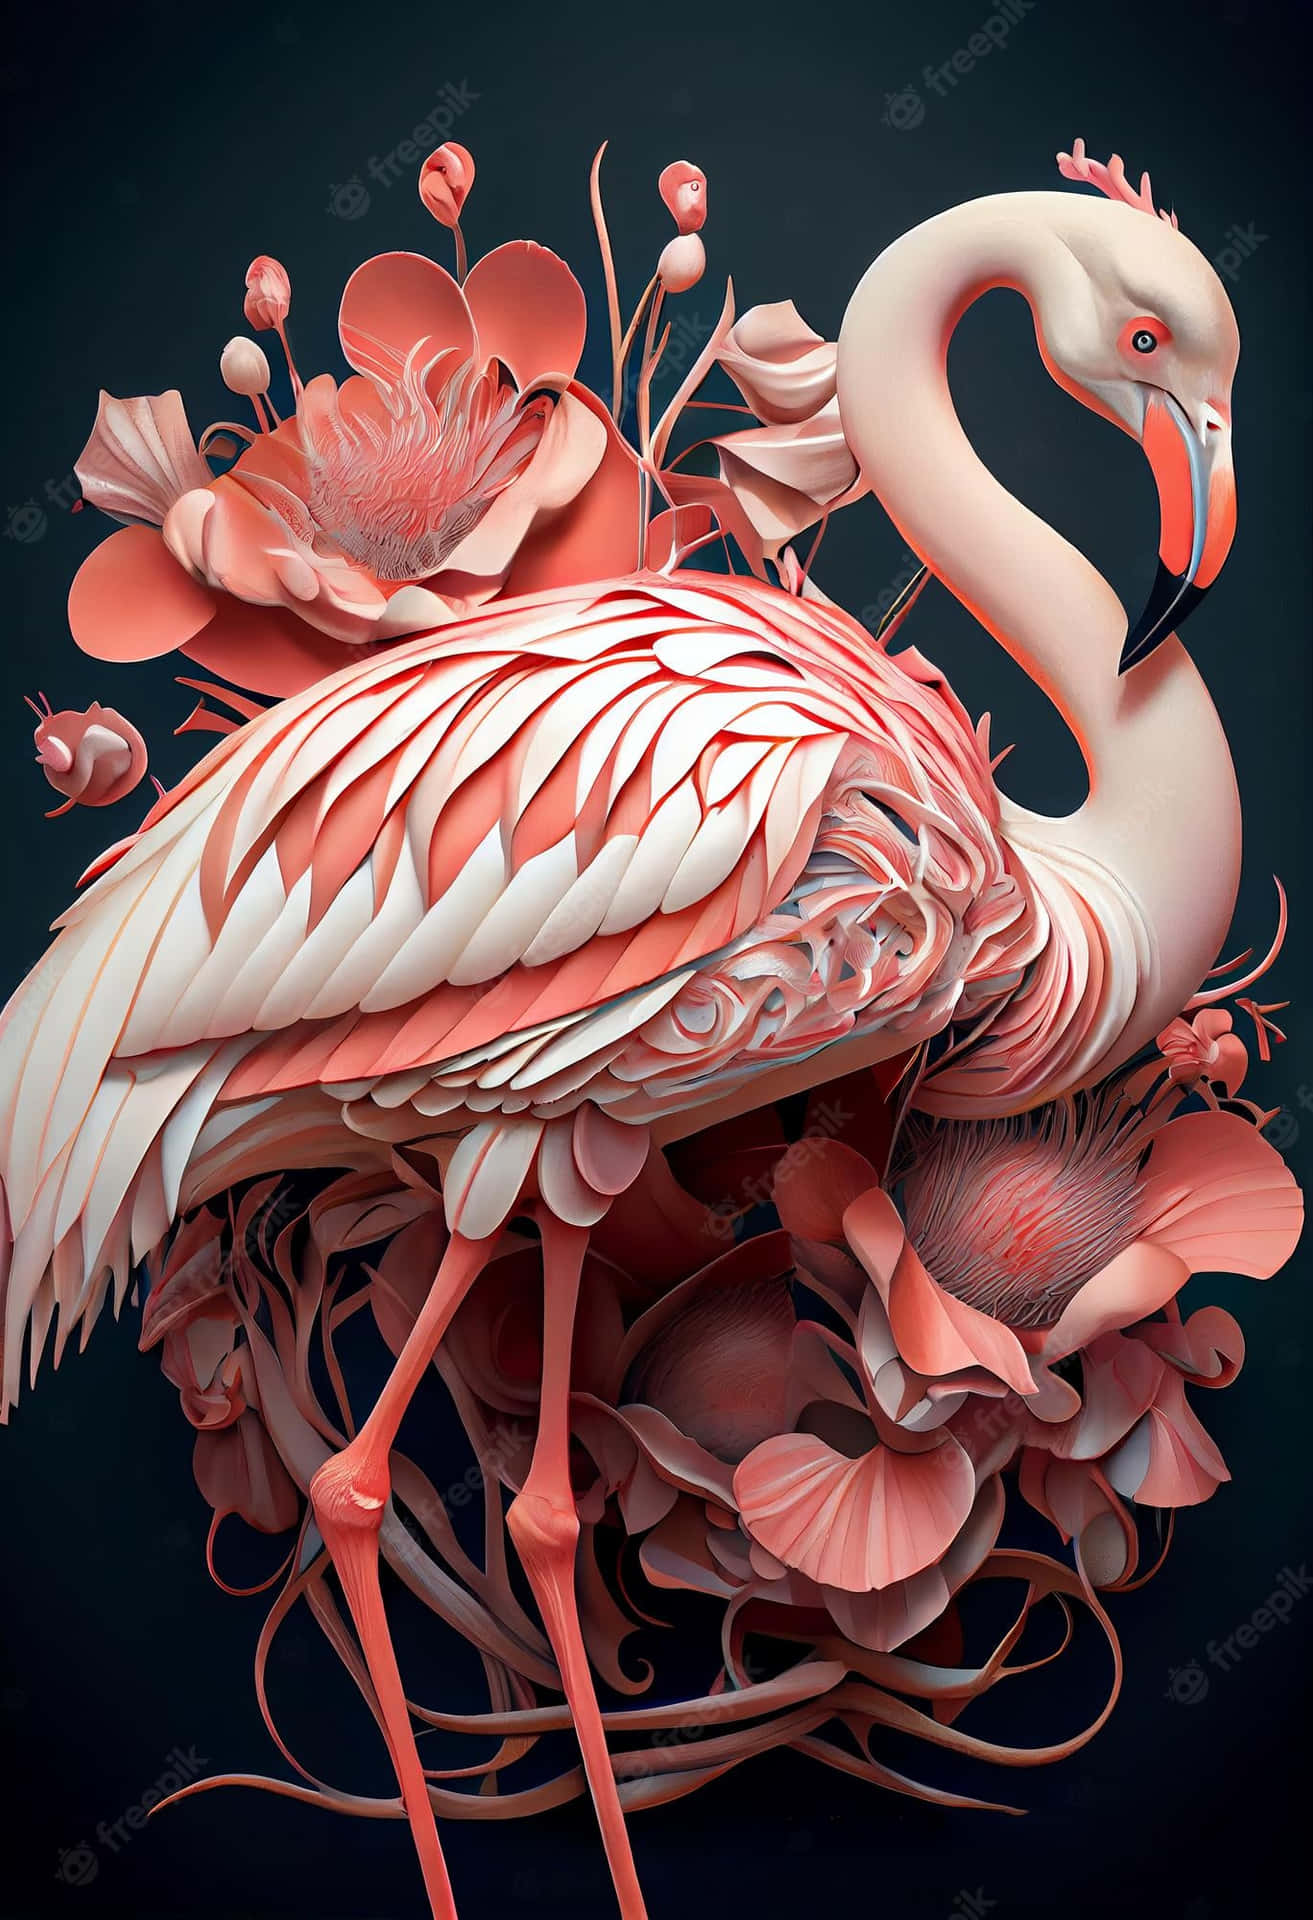 Glitter in the pink: A captivating pink flamingo in mid-stride in an iphone photo Wallpaper